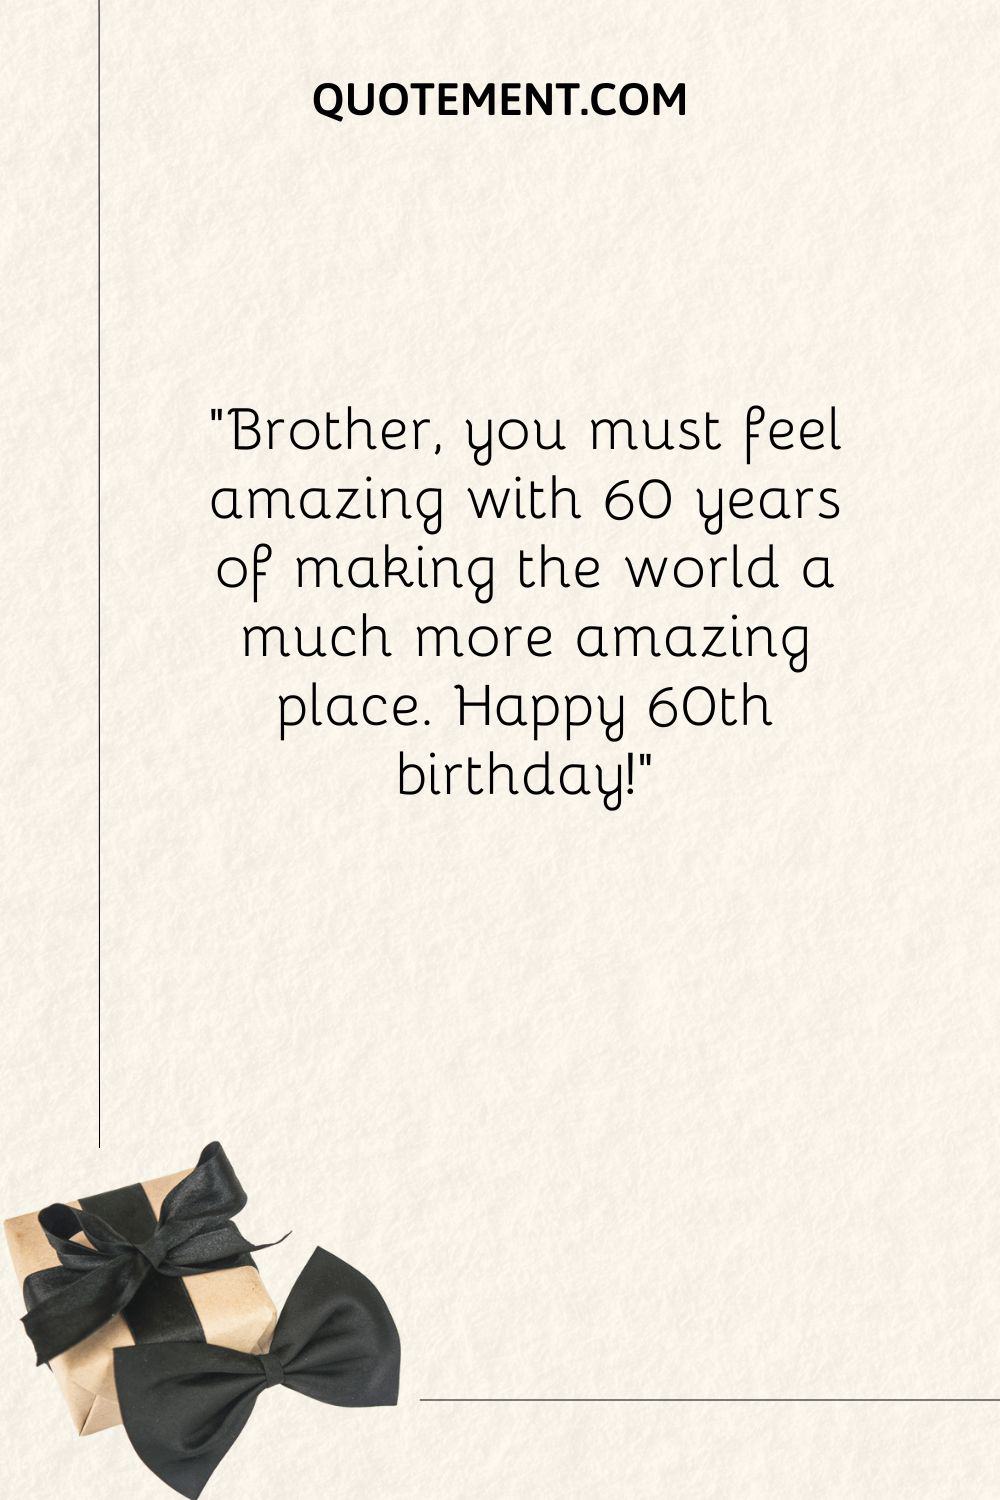 Brother, you must feel amazing with 60 years of making the world a much more amazing place